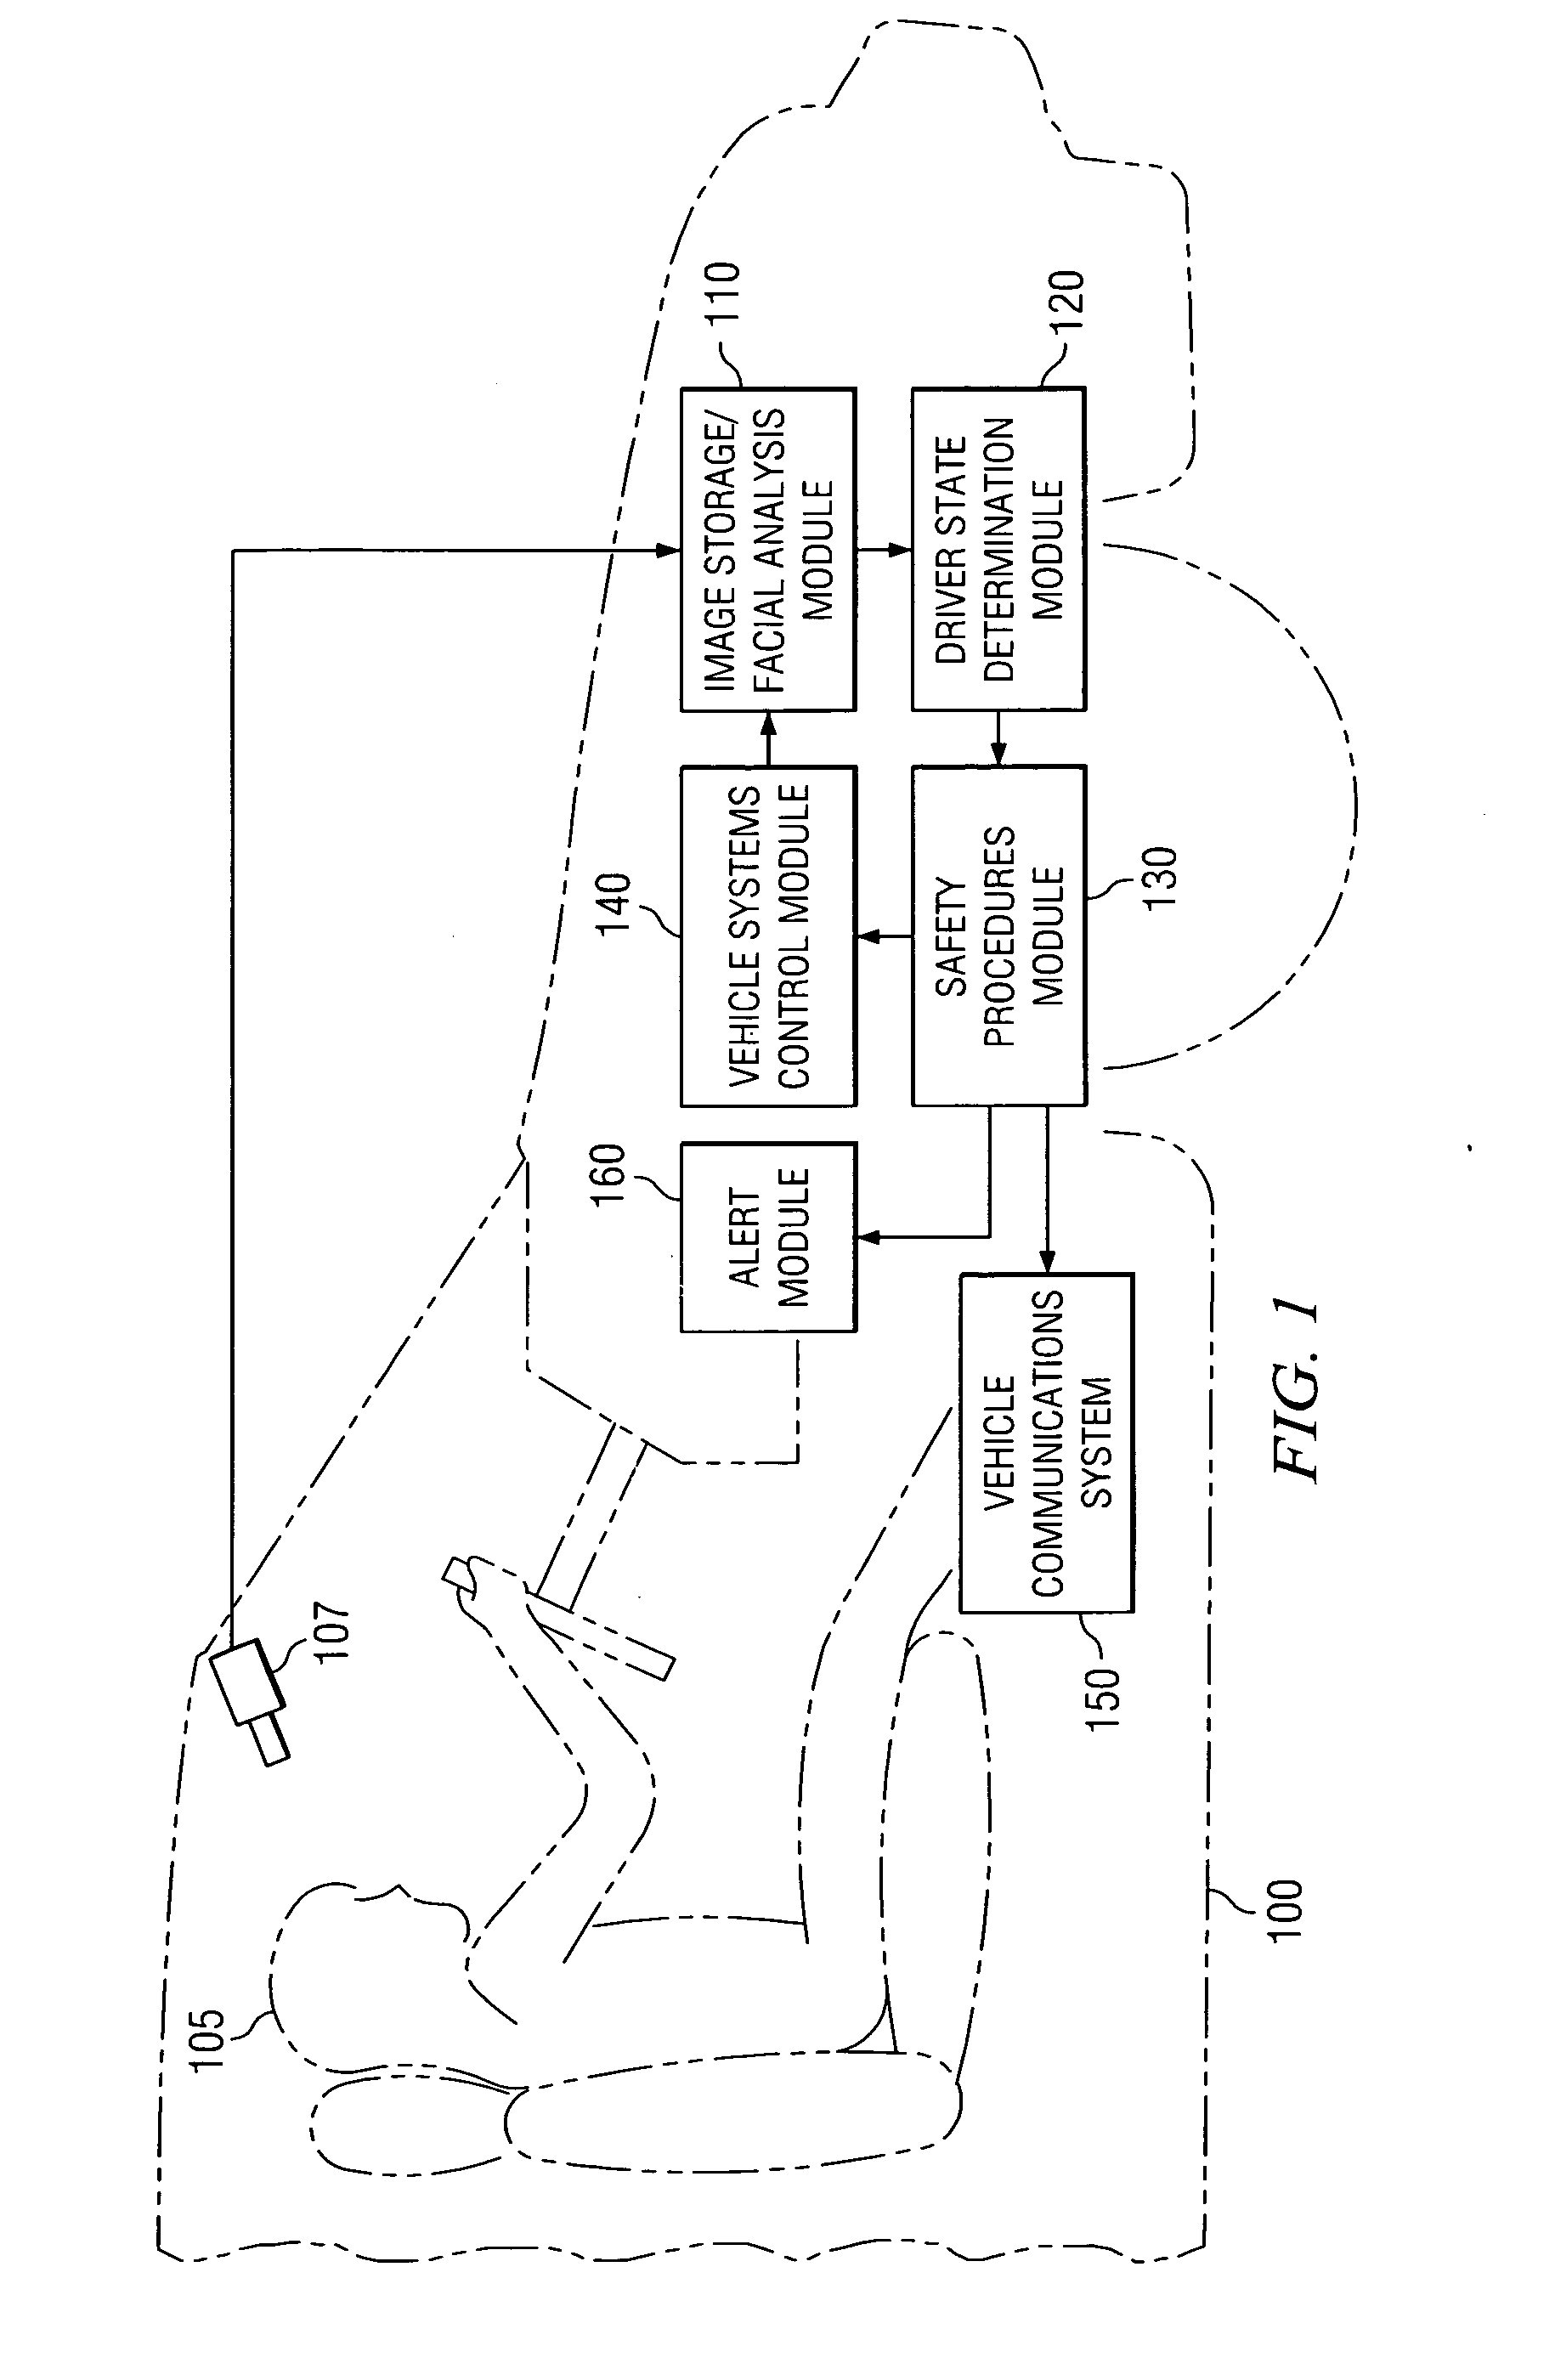 System and method for controlling vehicle operation based on a user's facial expressions and physical state